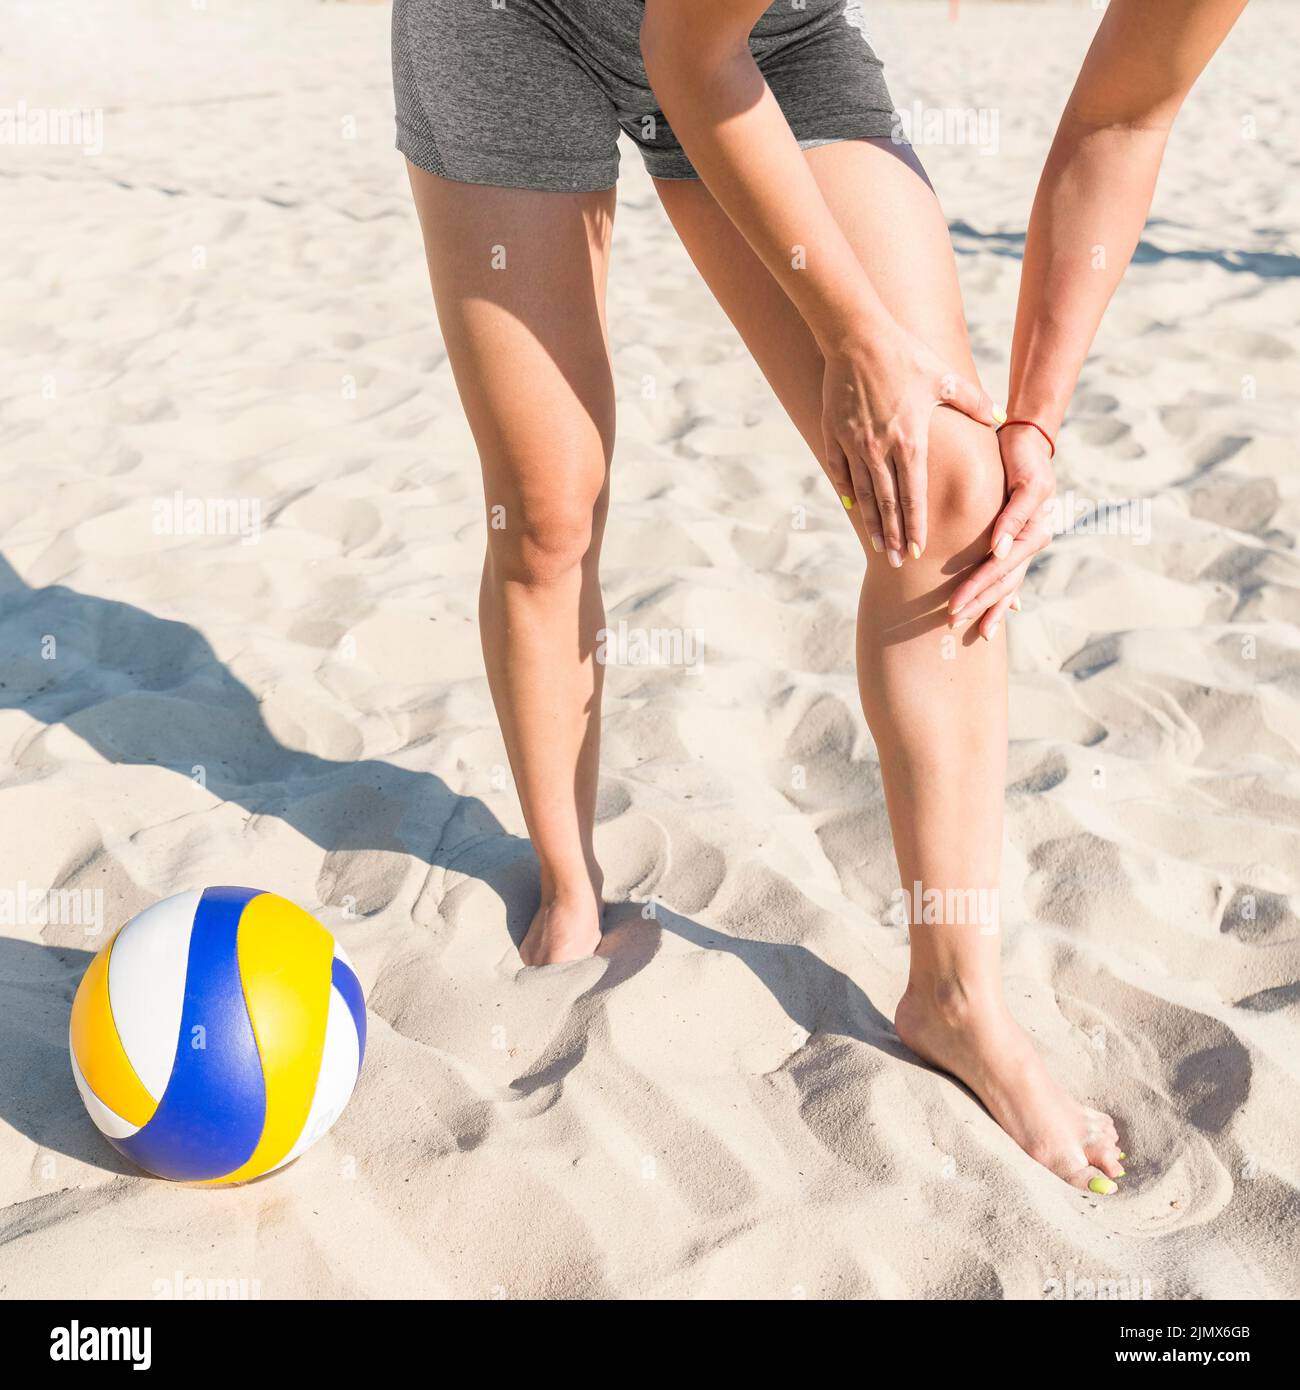 Female volleyball player hurting her knee while playing Stock Photo